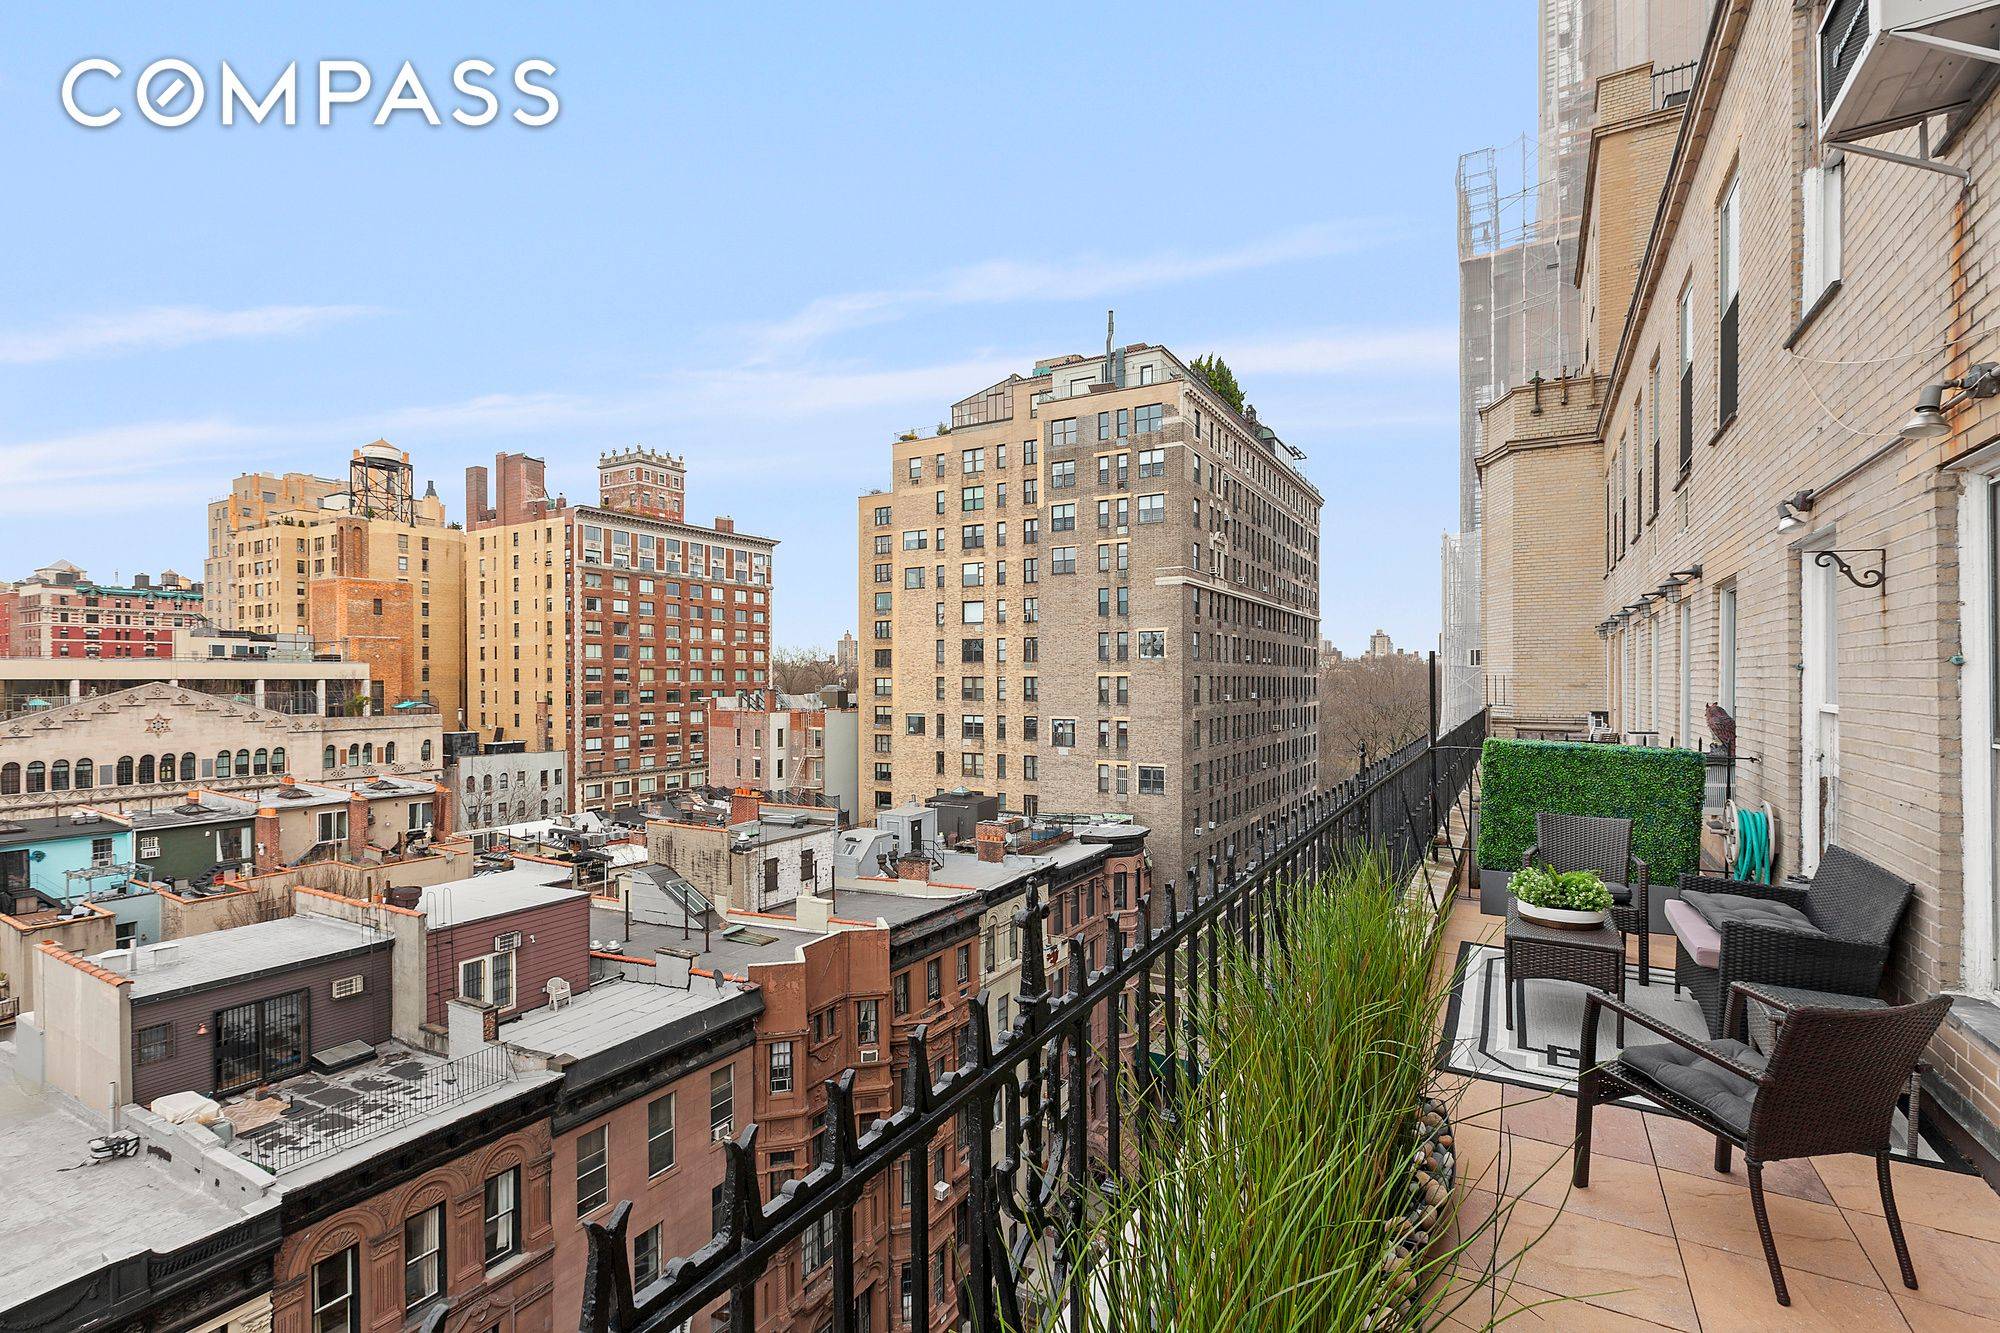 A one of a kind 7 room duplex with an expansive terrace at 15 West 81st Street, one of the best buildings on the Upper West Side near Central Park.